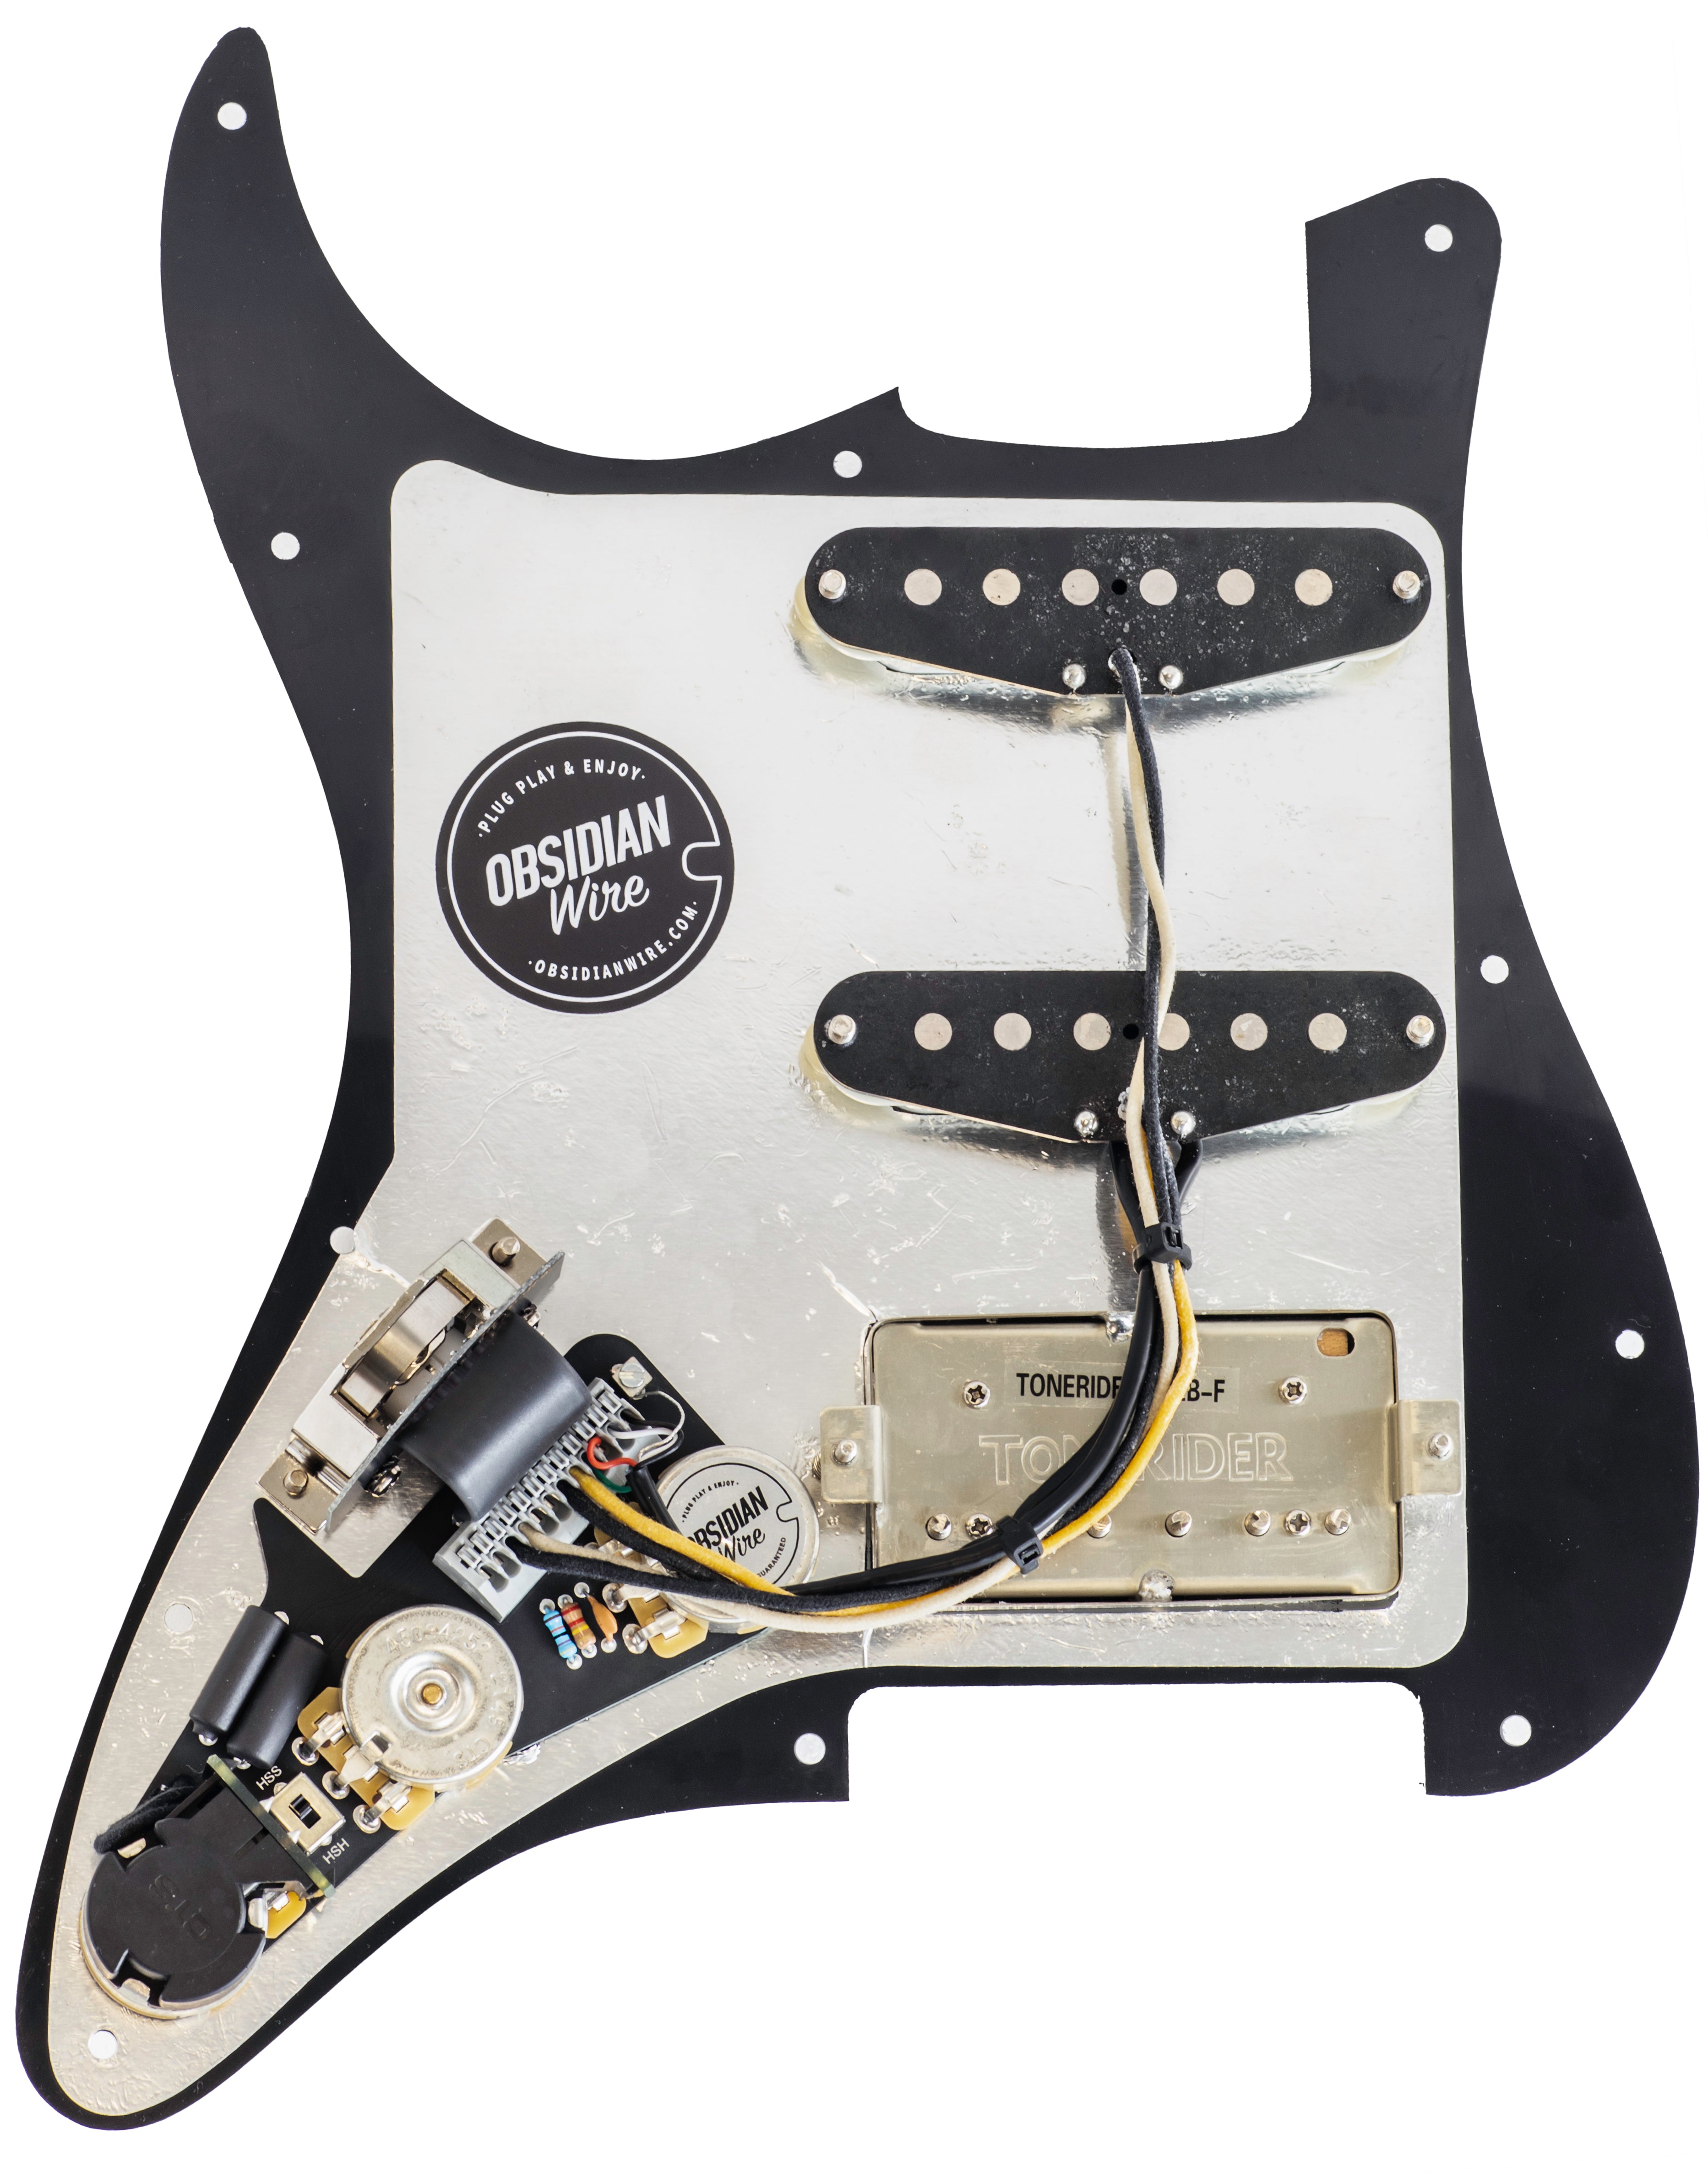 Back view of the ObsidianWire HSS loaded pickguard for Strat featuring the Custom HSS 7 Way harness